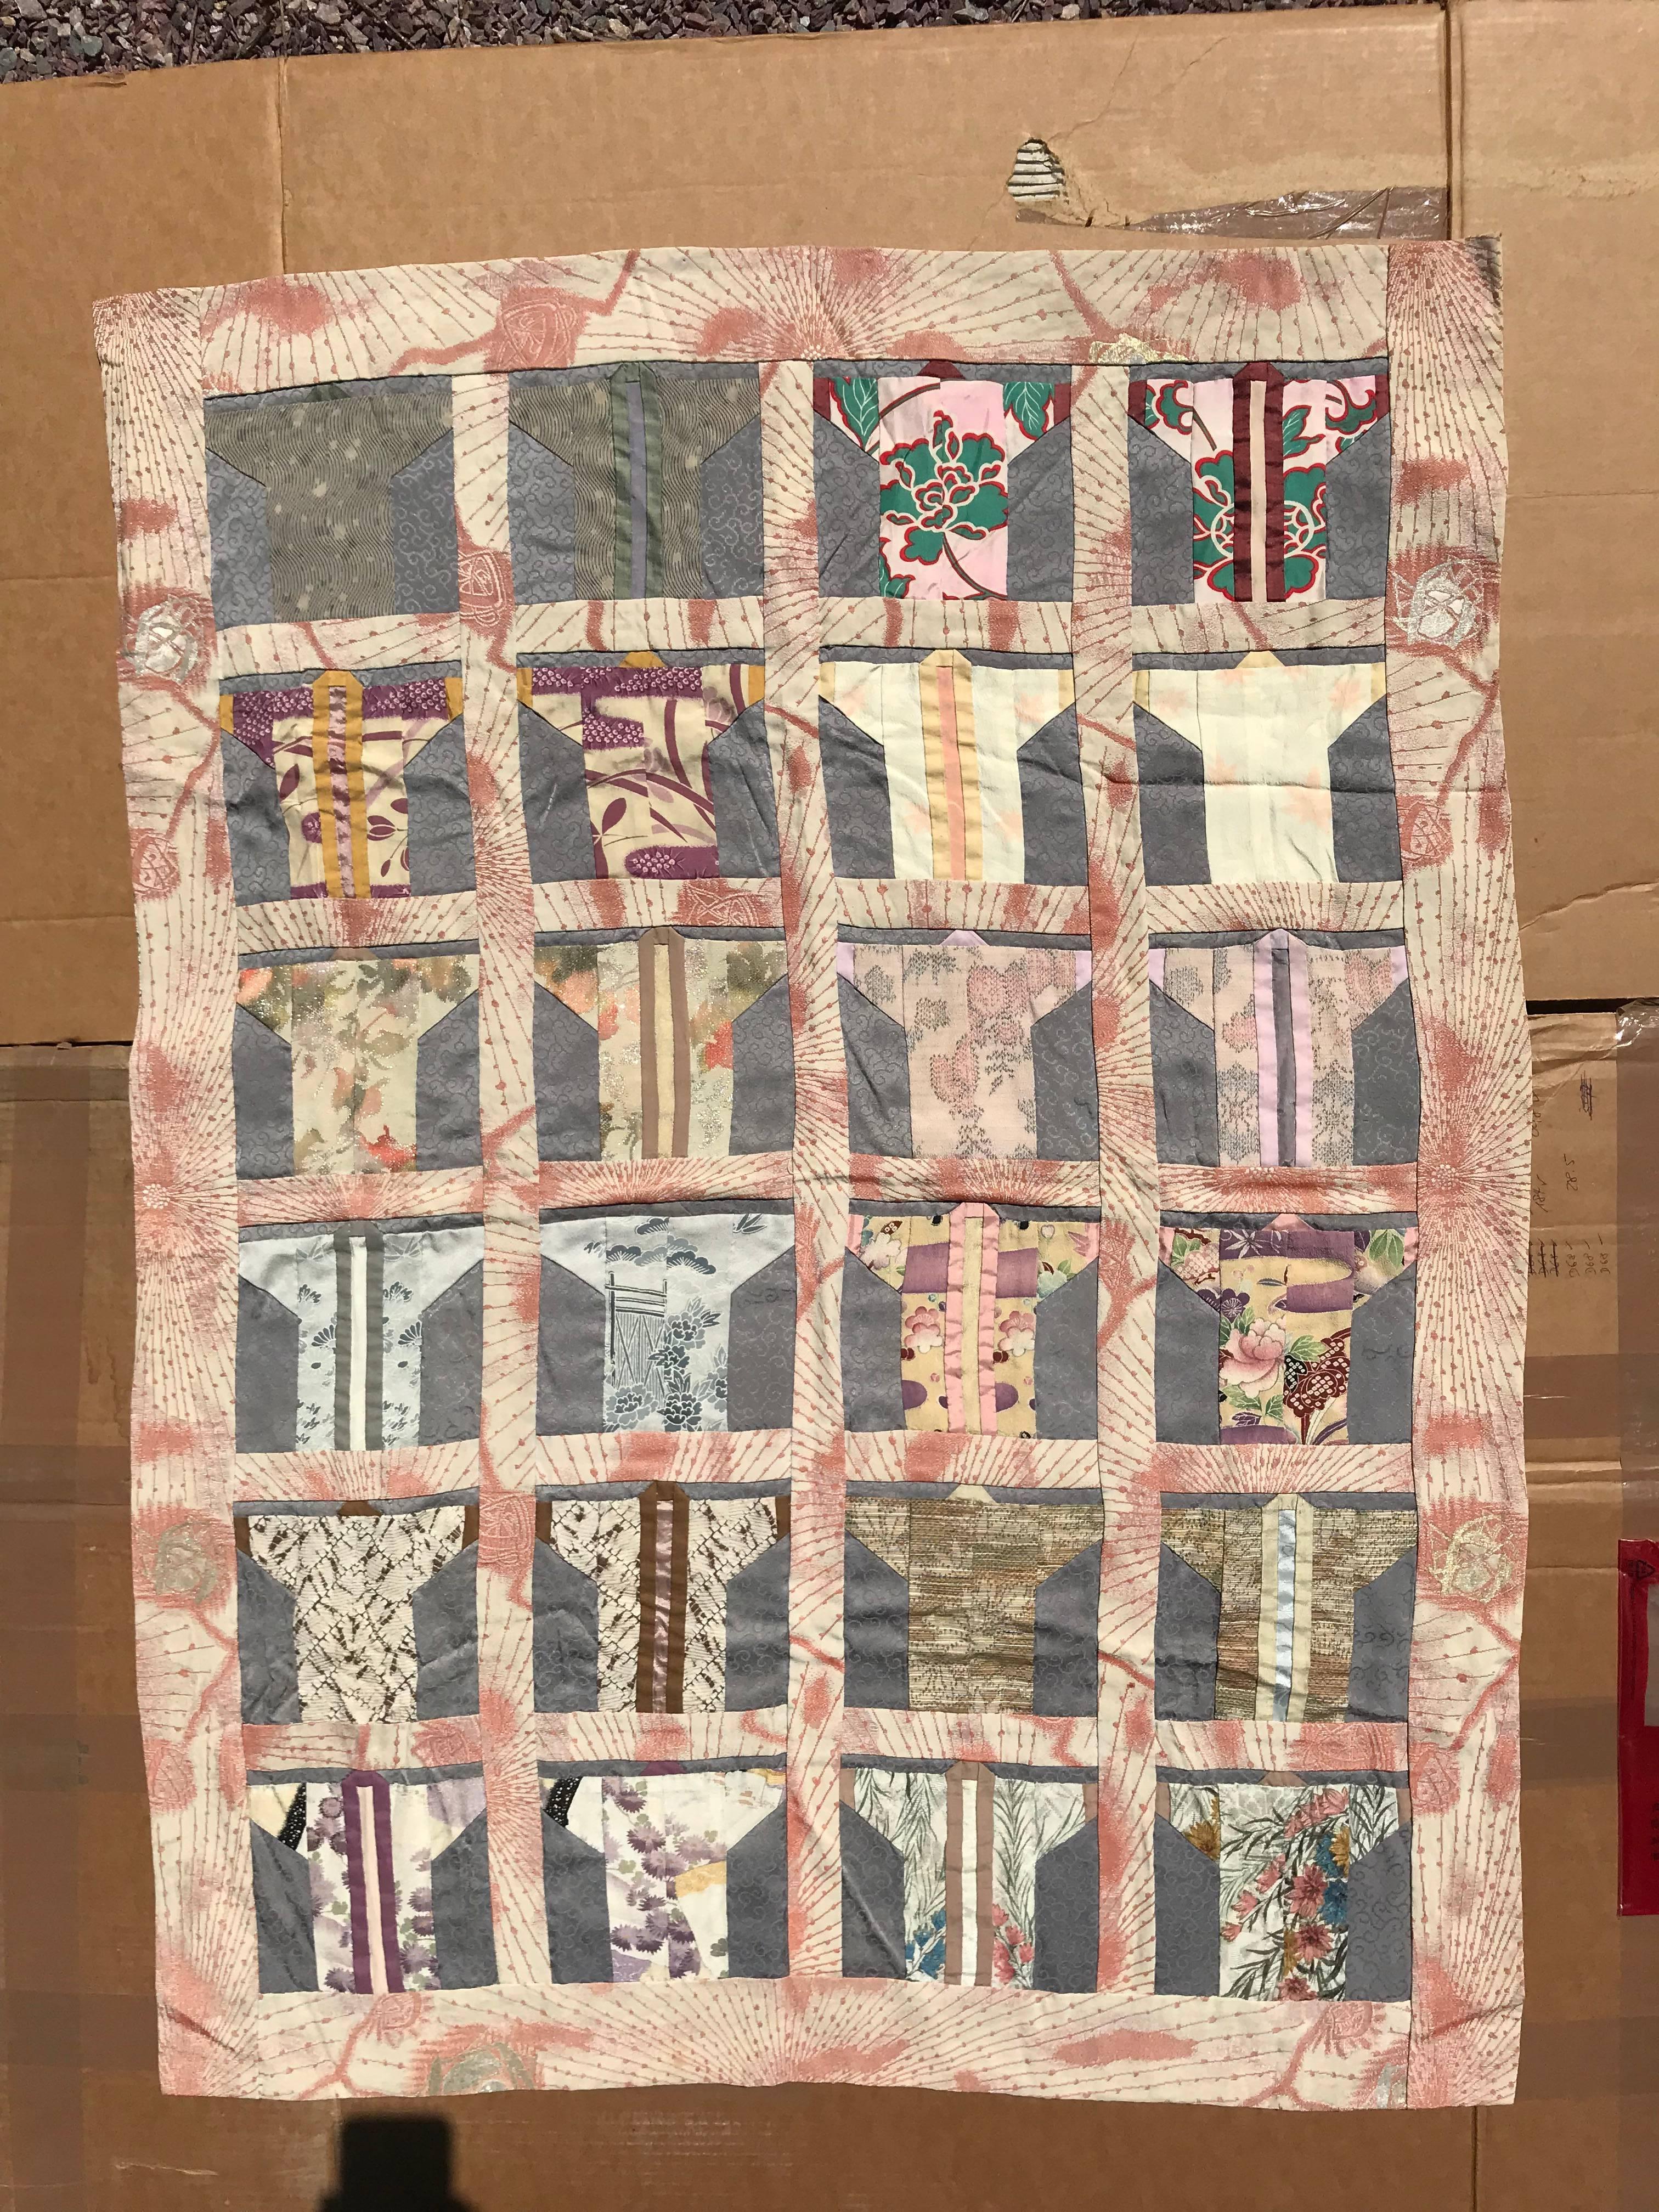 An exceptionally fine quality Japanese hand sewn small fabric quilt wall art crafted from 19th-20th century Kimono fabric in the form of miniature kimono.

Pretty pastels.

It is immediately and eminently frameable if you so desire. 

This is an